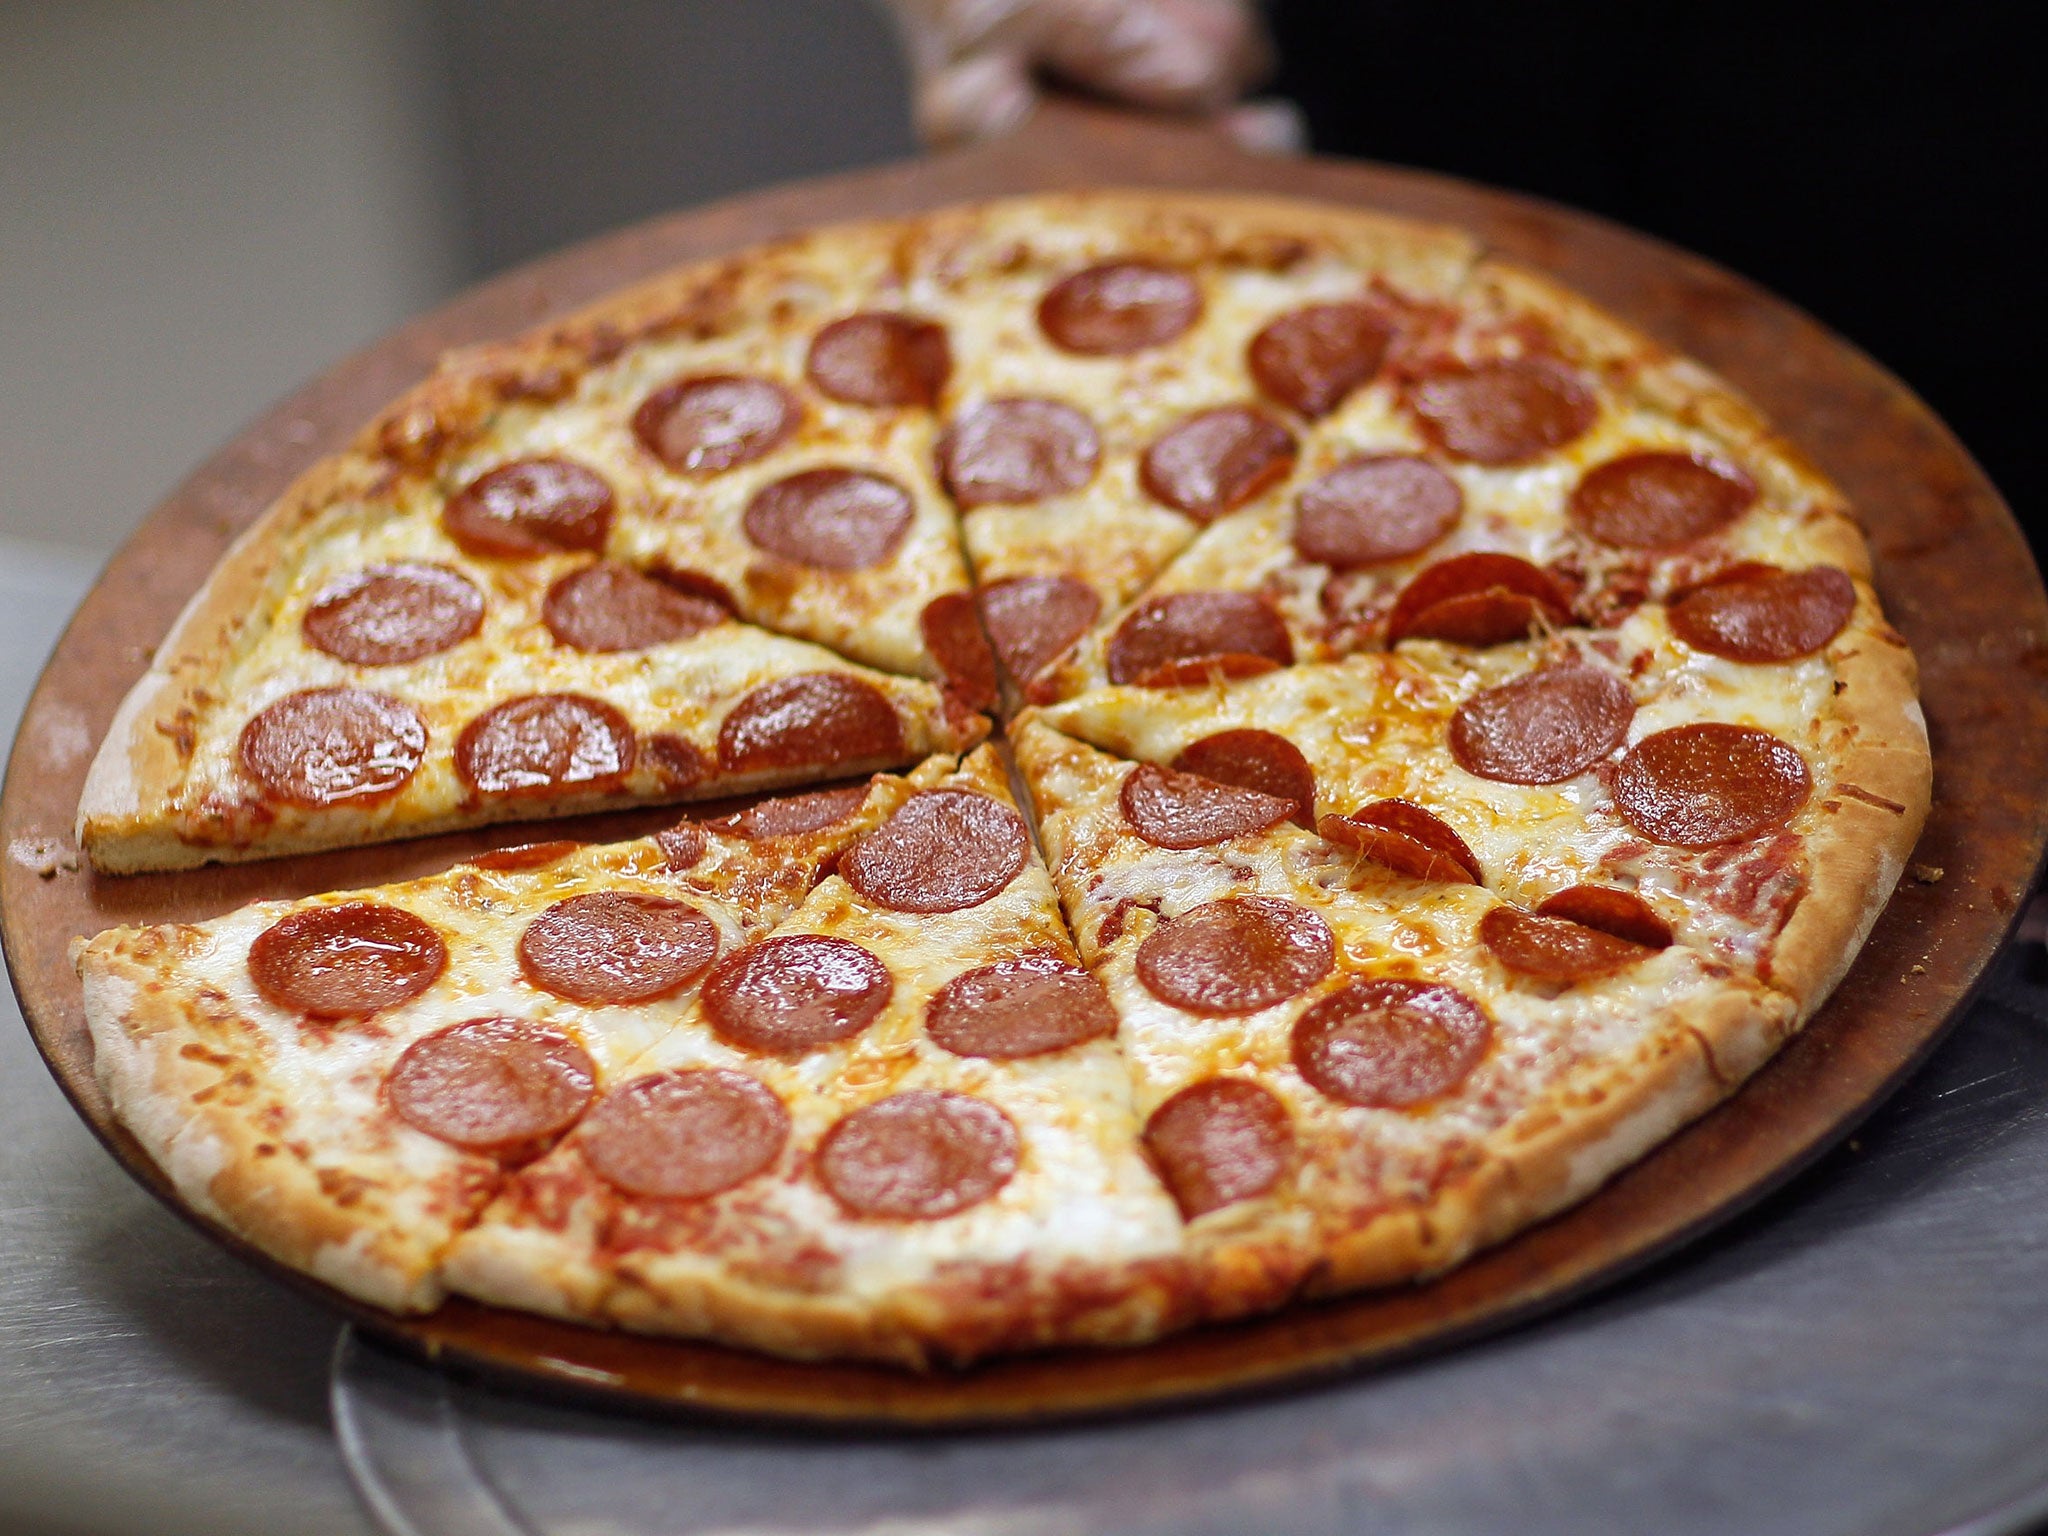 German vans have reportedly been delivering up to 60 pizzas at one time to Swiss customers